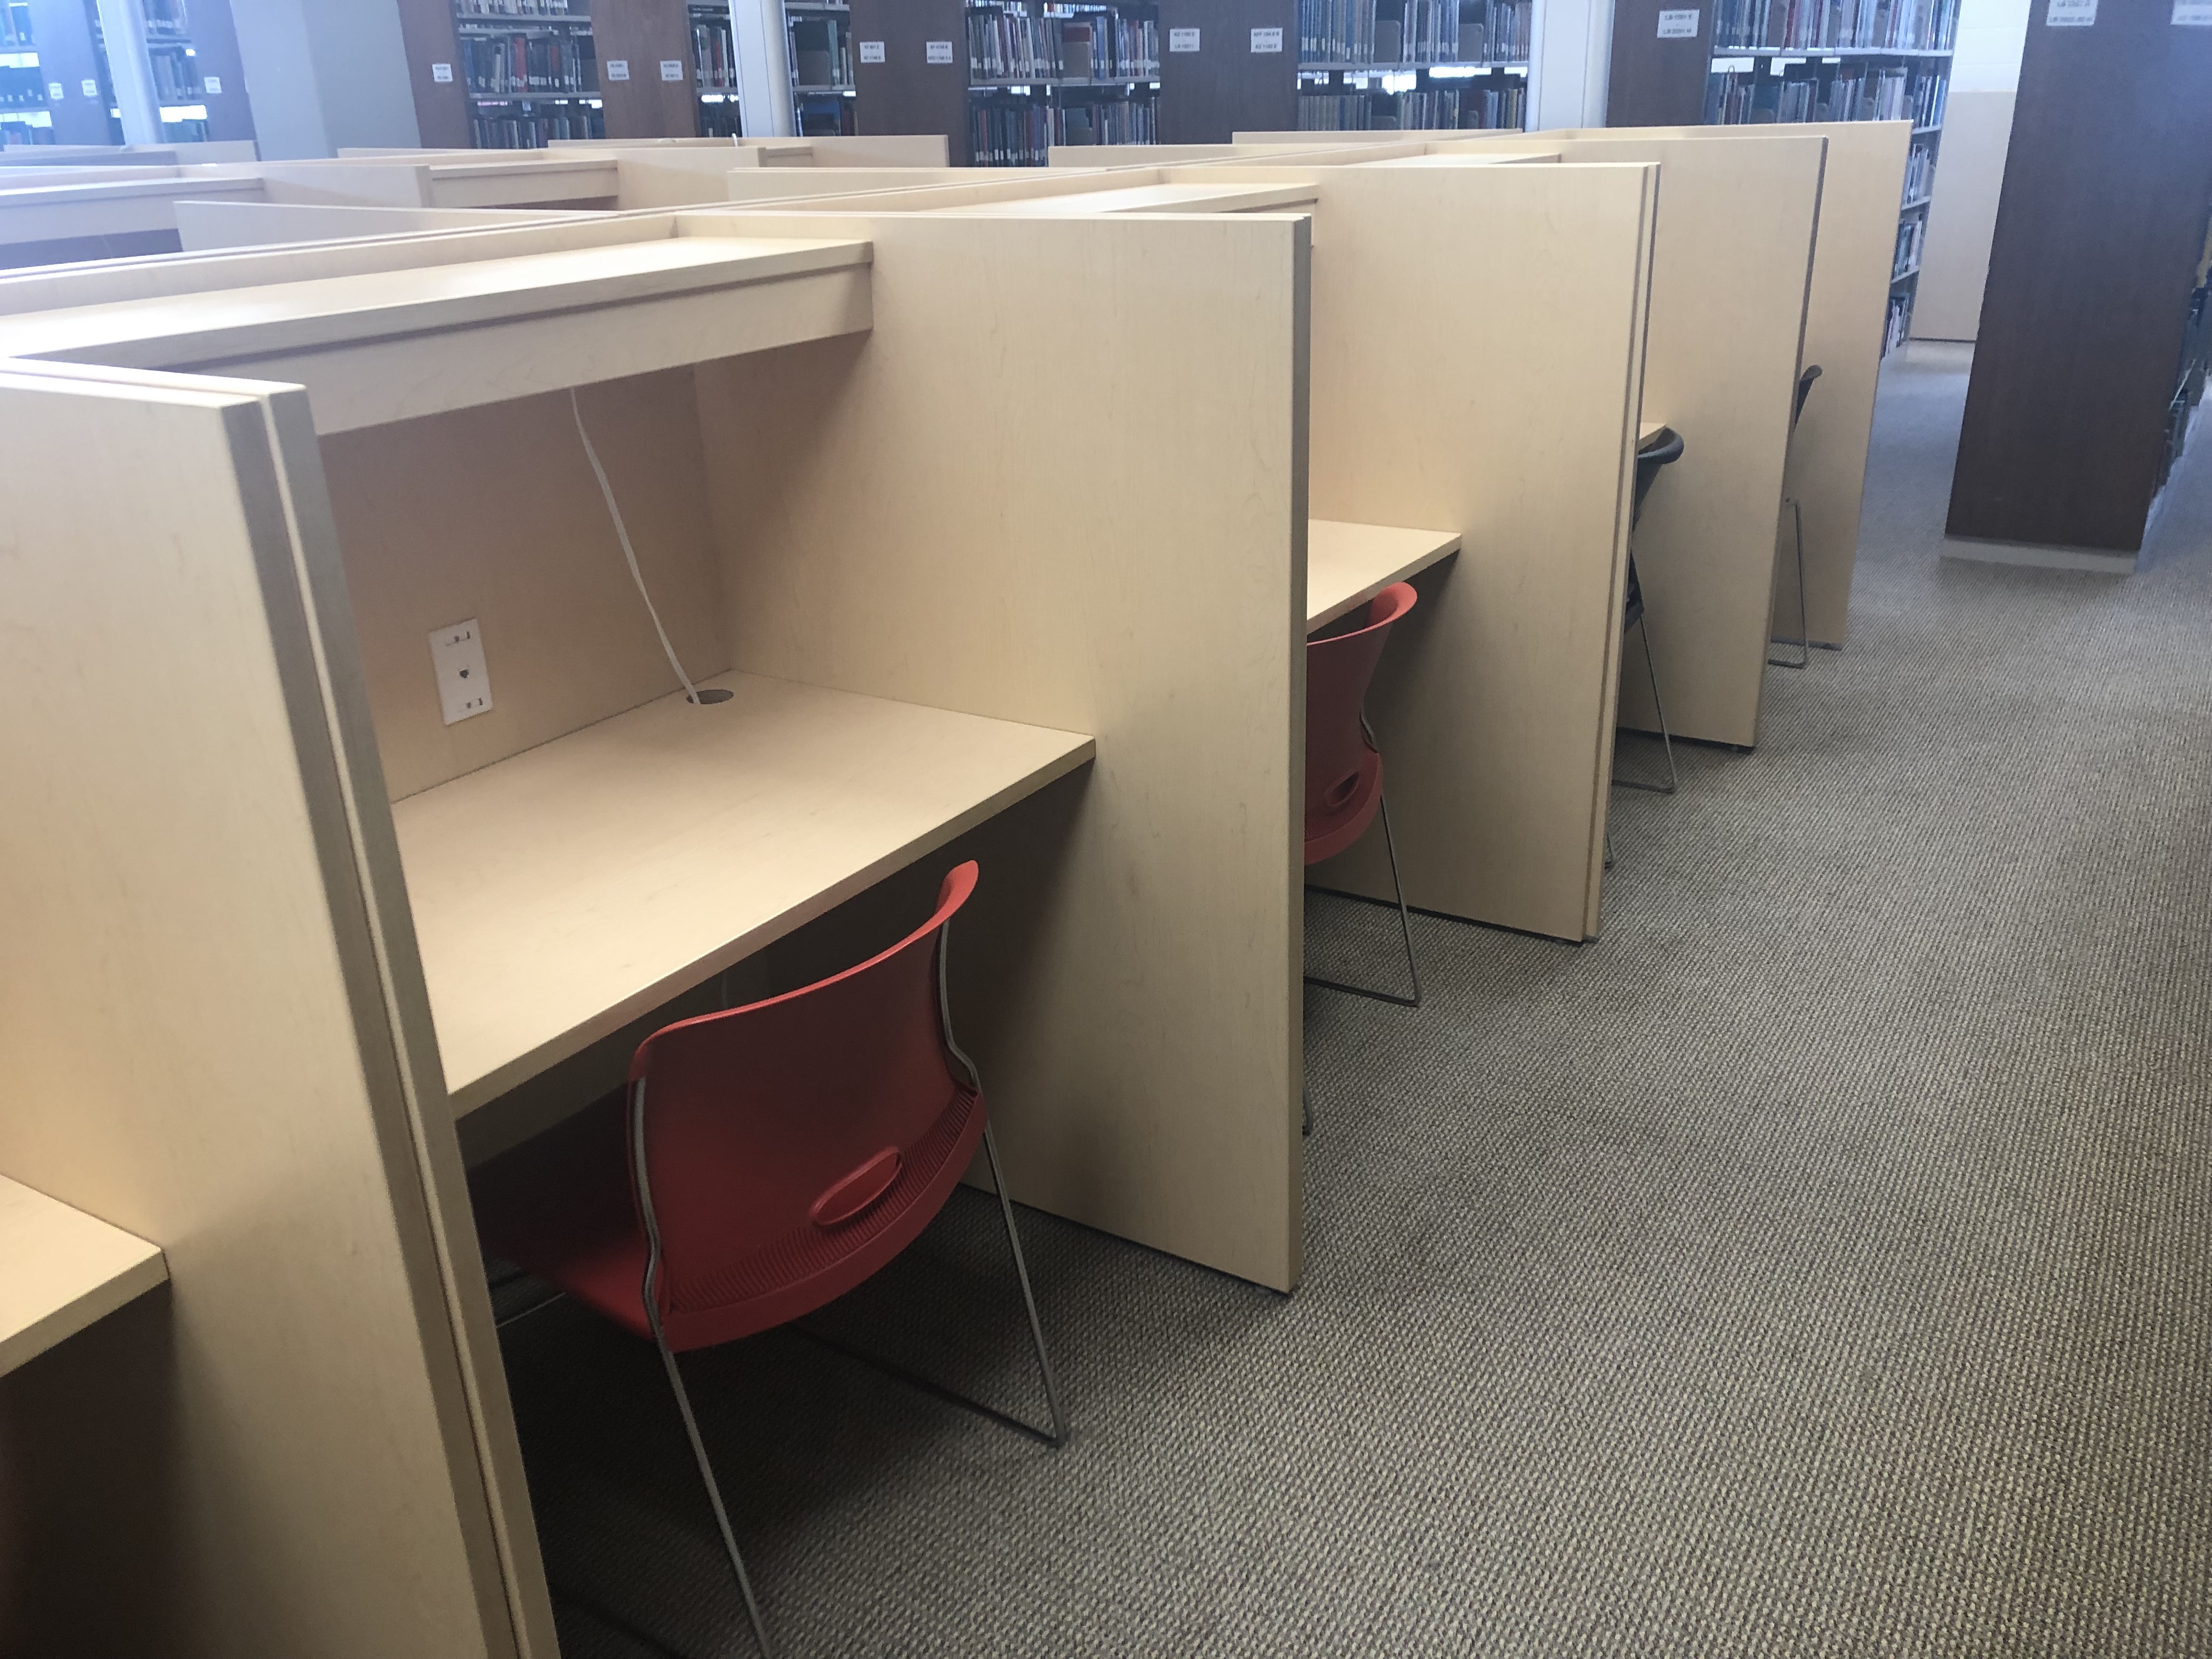 A row of study carrels. Desks side by side with privacy partition between them. Not much space under the desk for a guide dog. Dimensions are in text on this page